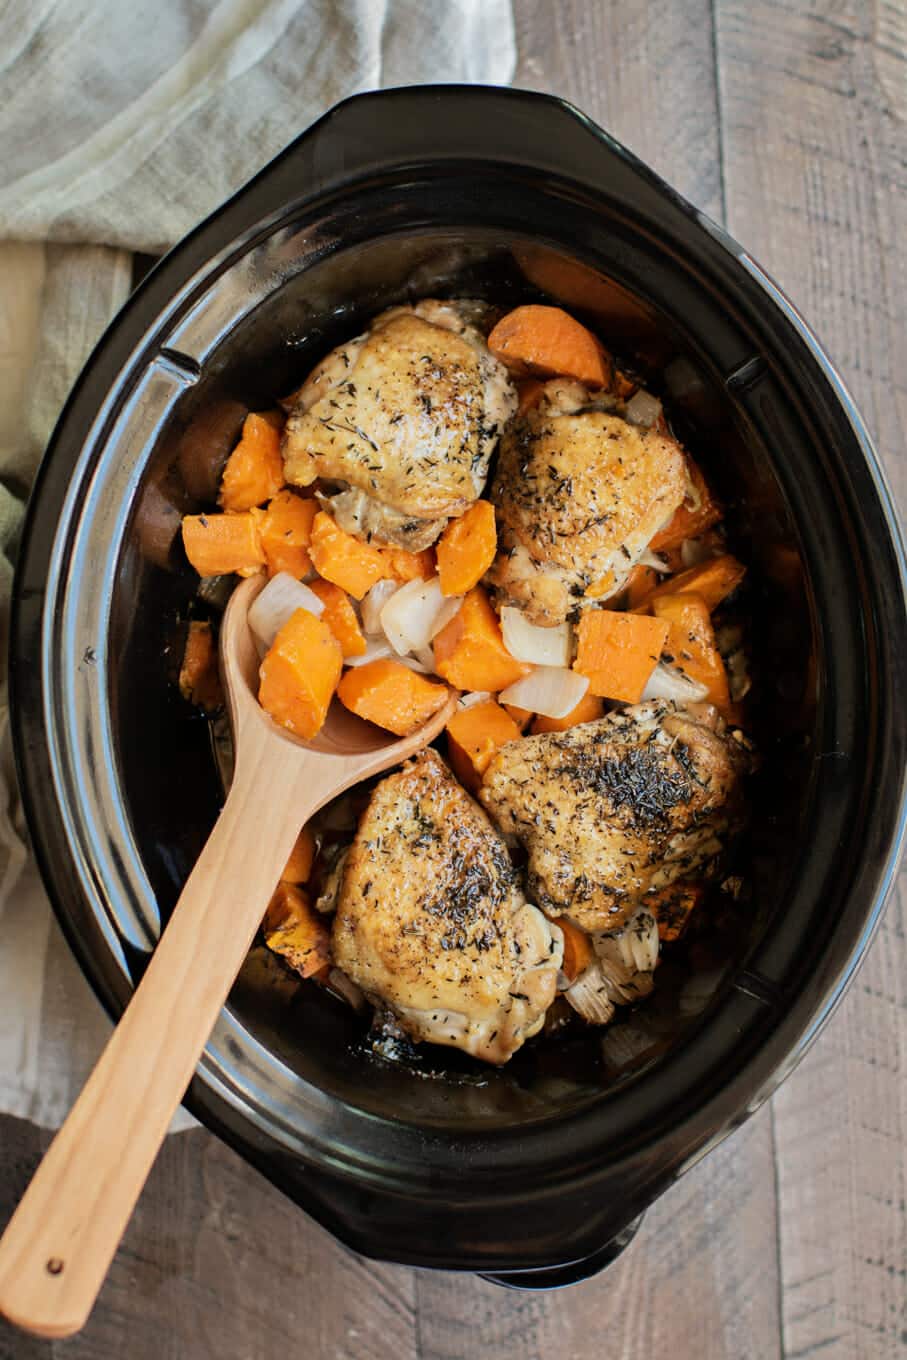 Cooked chicken thighs, sweet potatoes and onions in slow cooker.